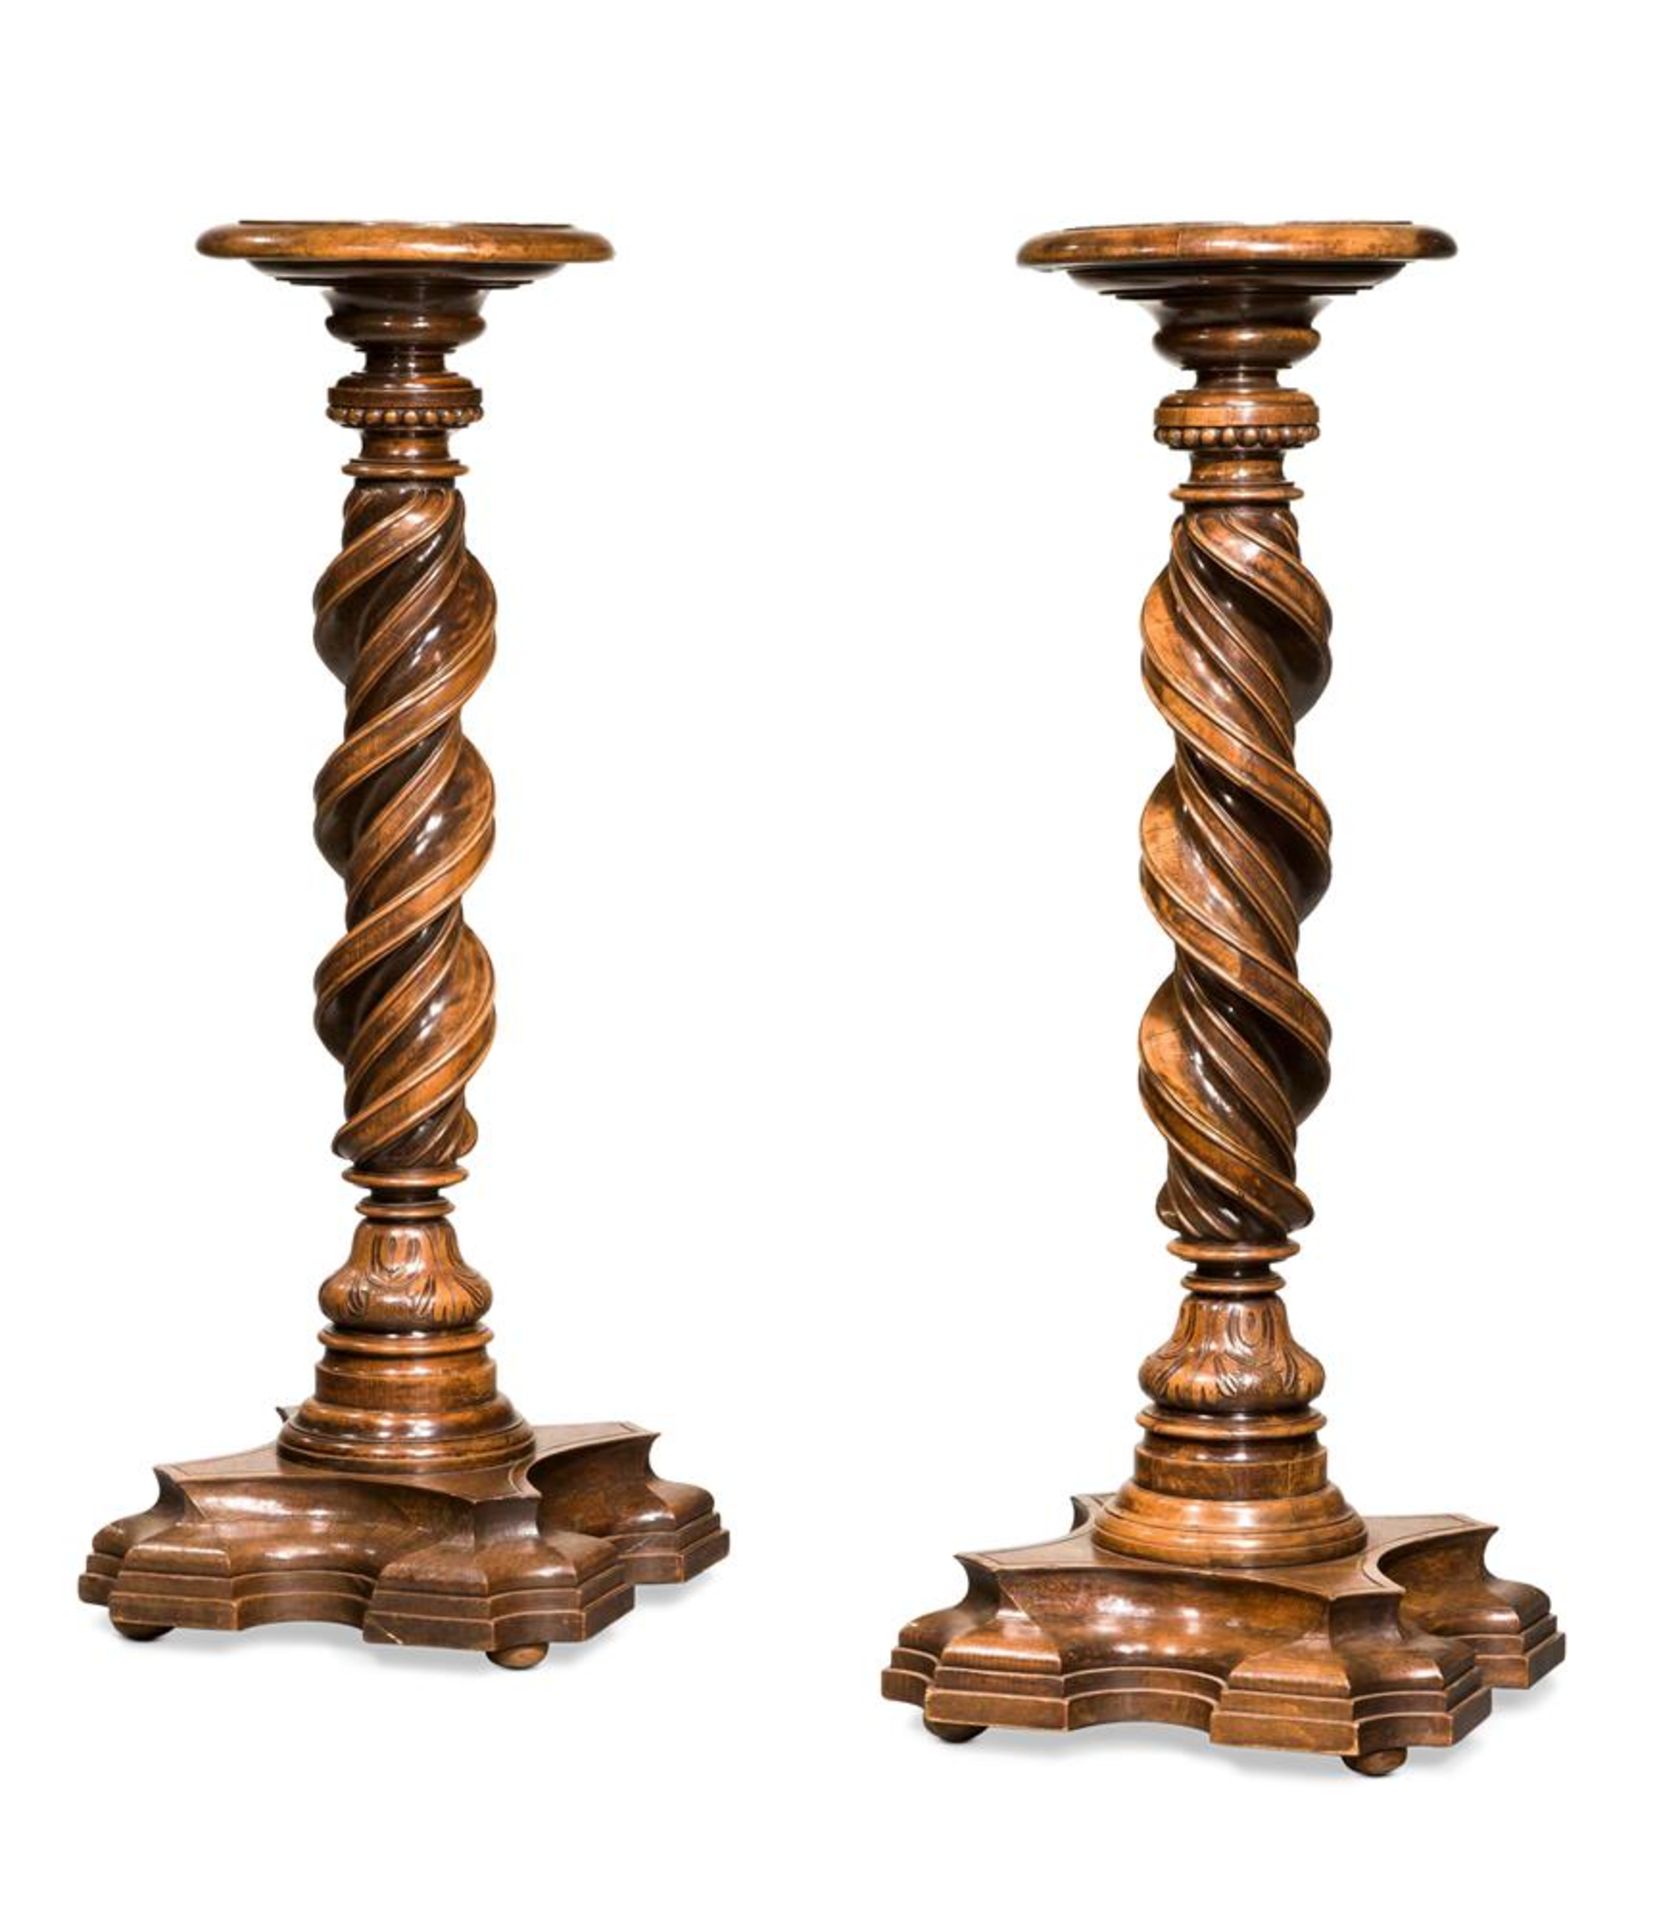 A PAIR OF ITALIAN CARVED WALNUT TORCHERES, IN 17TH CENTURY STYLE, 19TH CENTURY